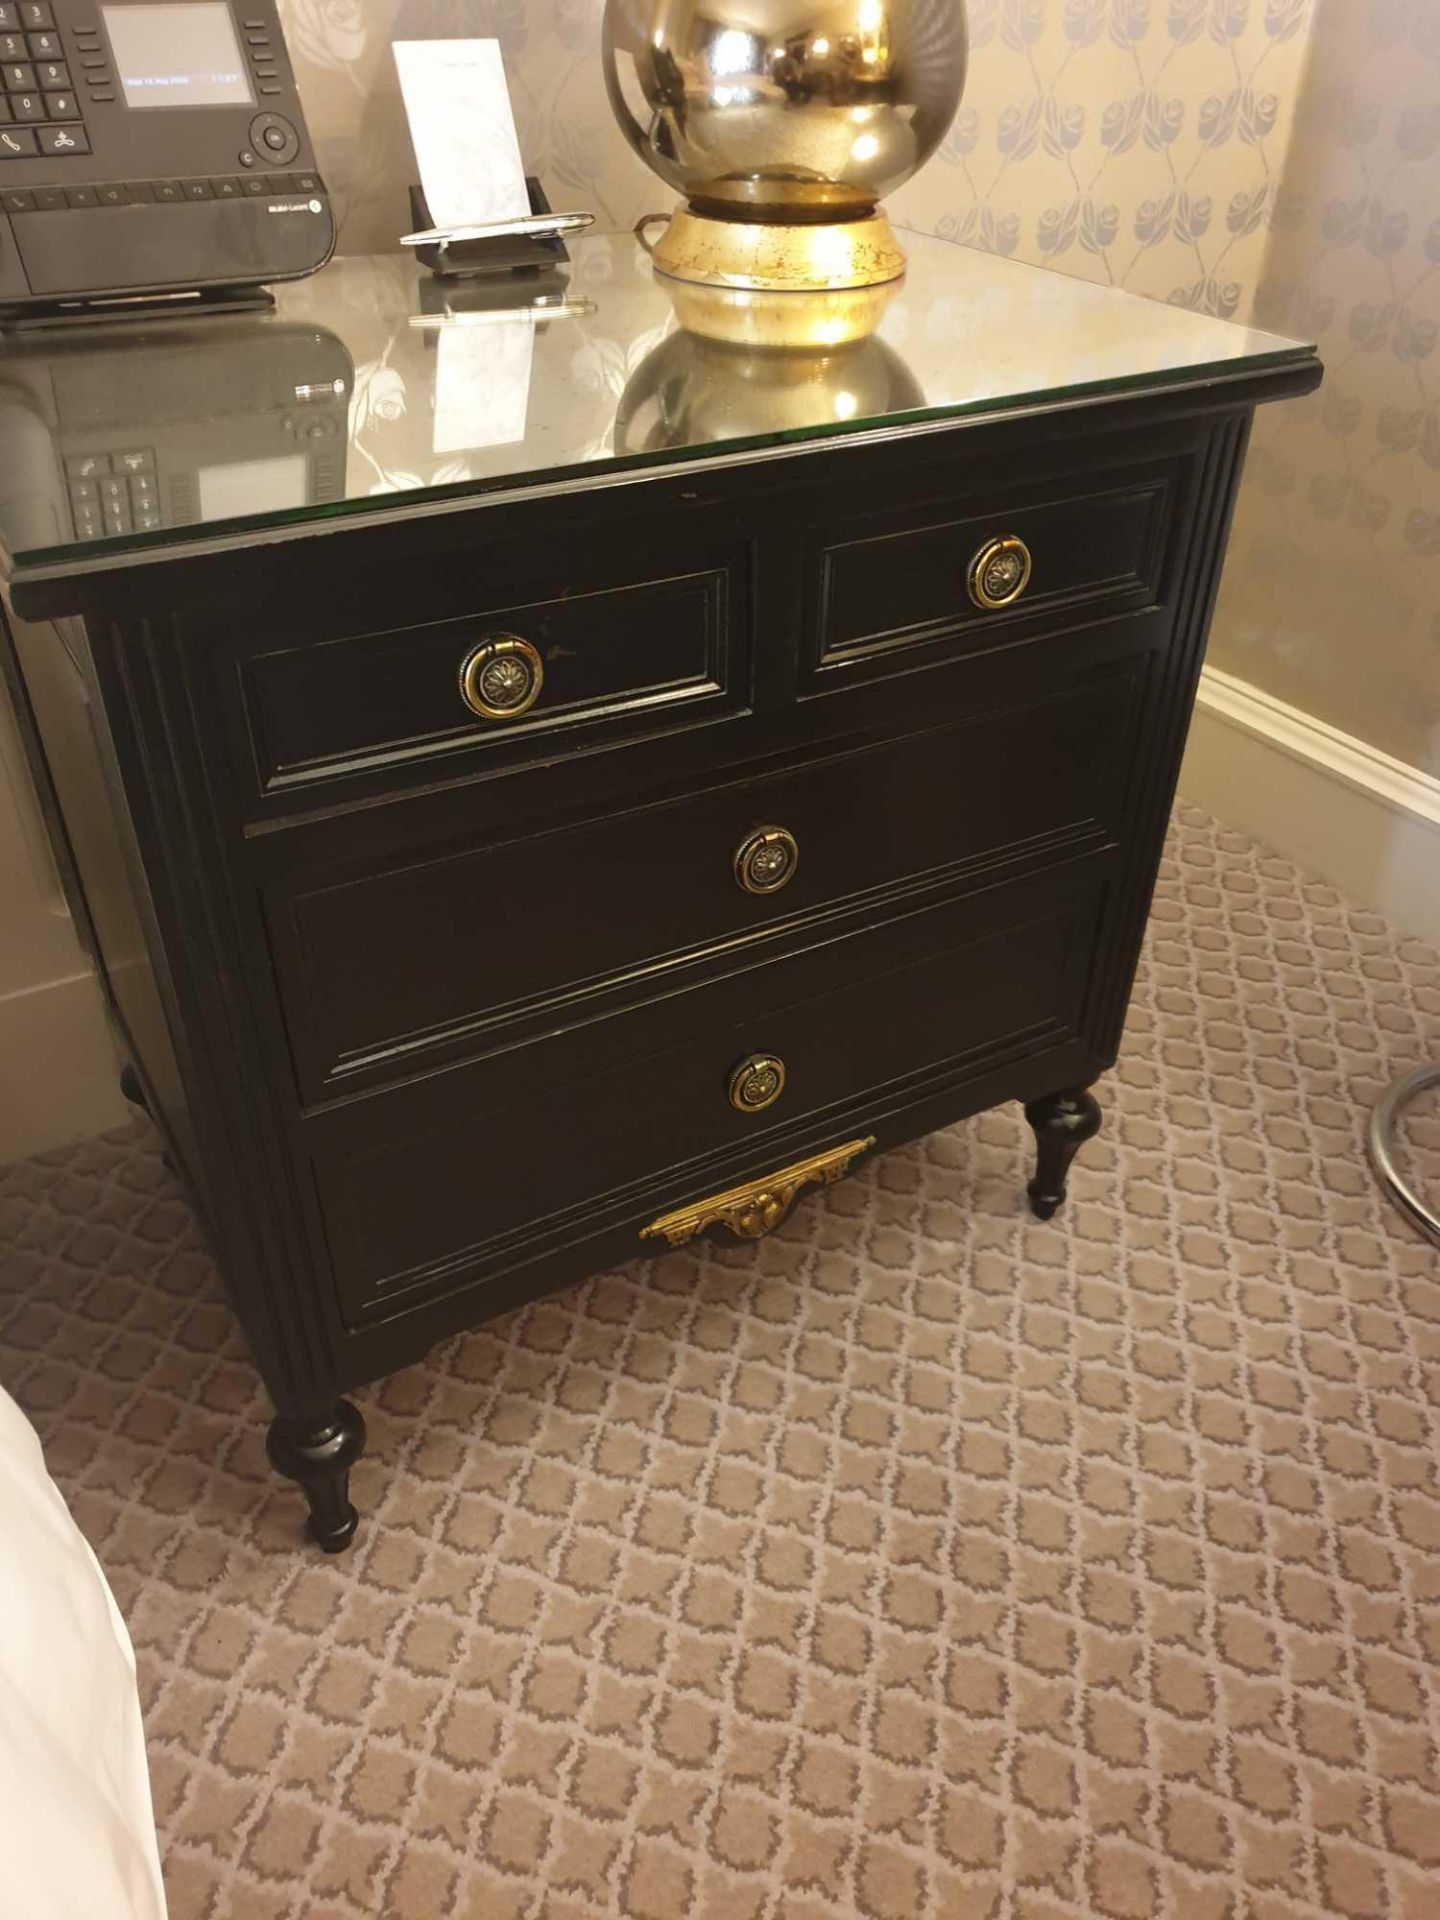 A Pair Four Drawer Mirrored Top Commode Chests Raised By Four Block Feet With A Square Carved